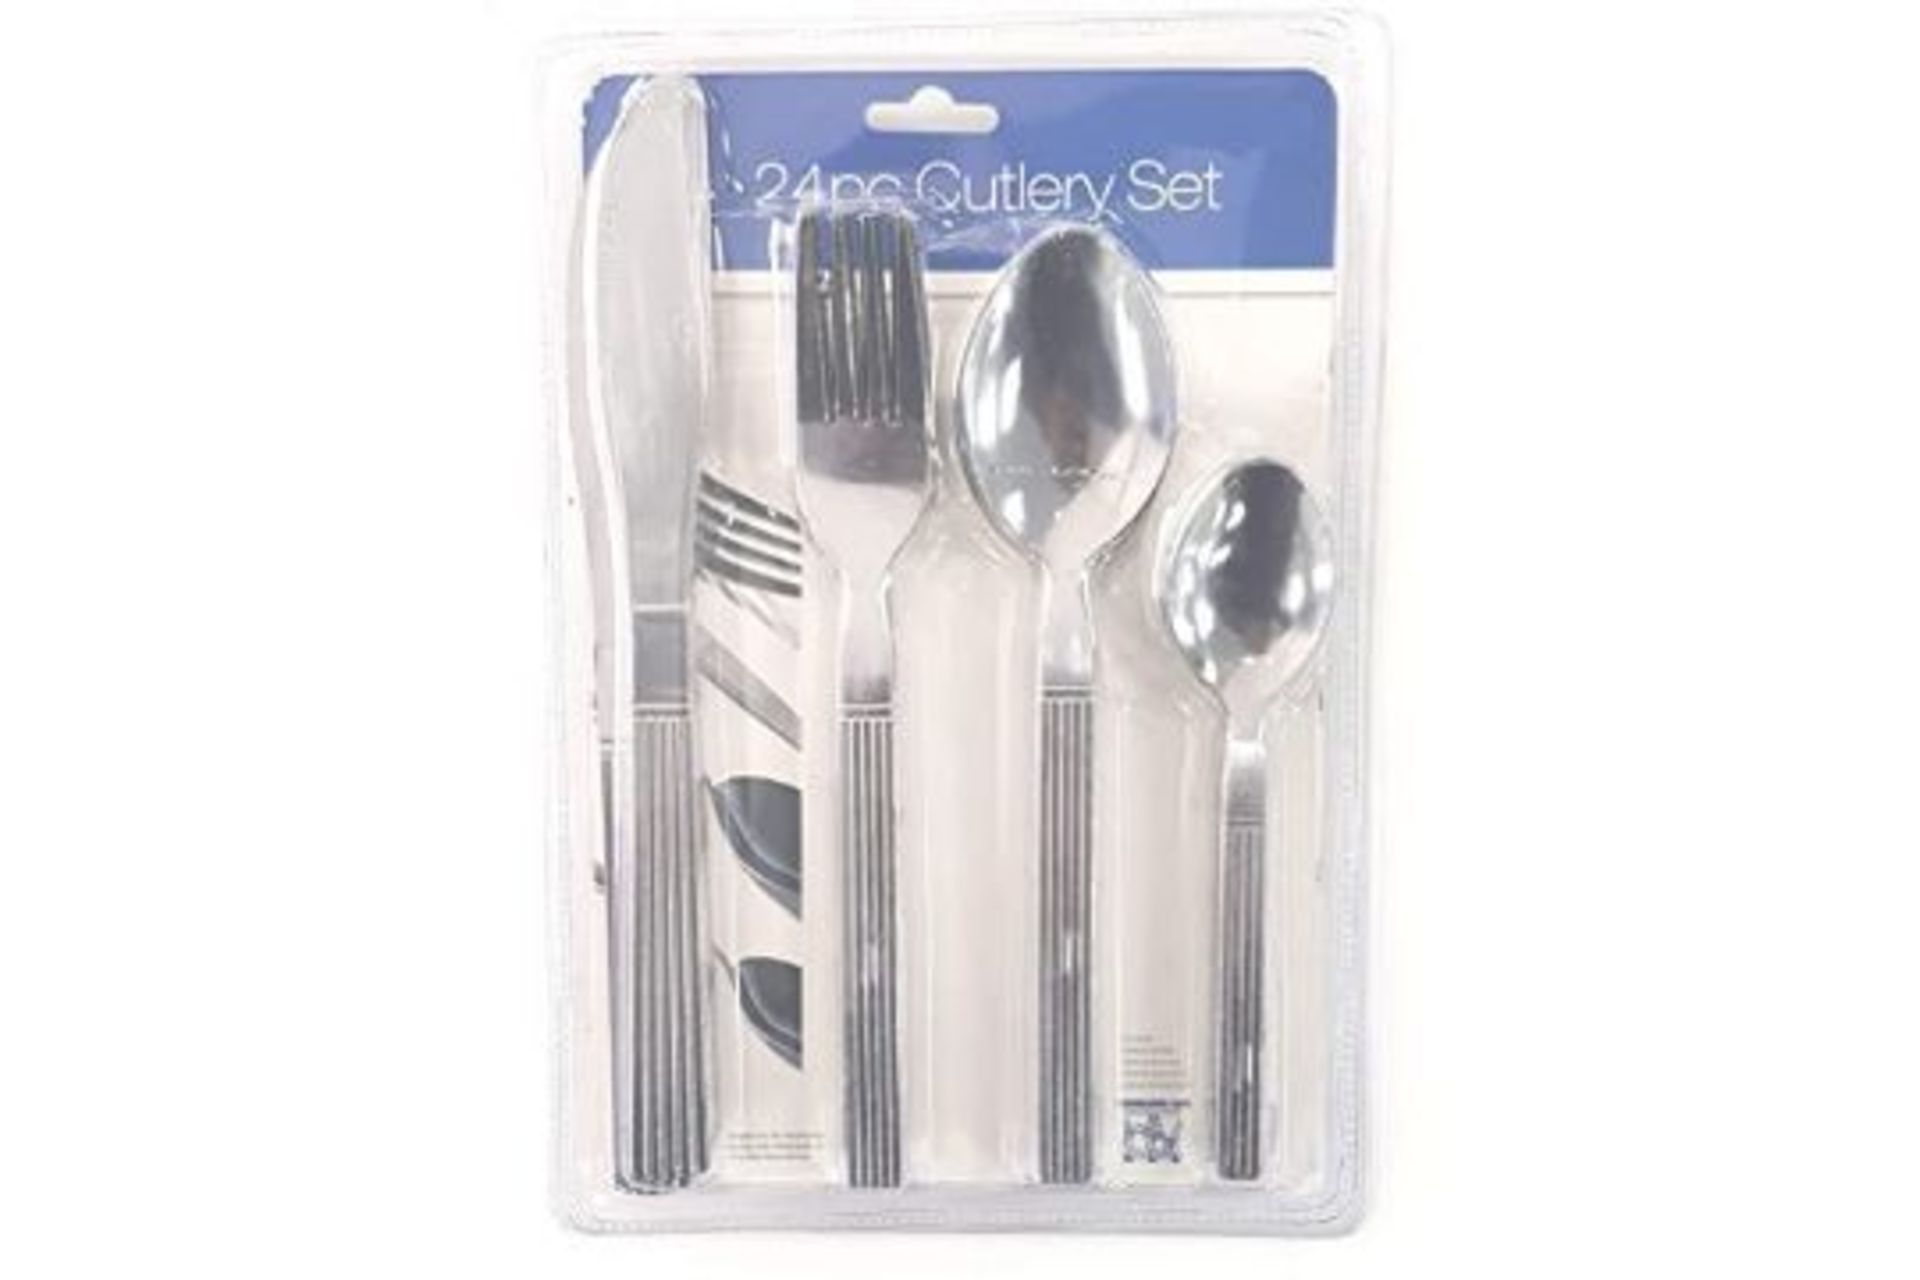 New 24pc Stainless Steel Cutlery Set